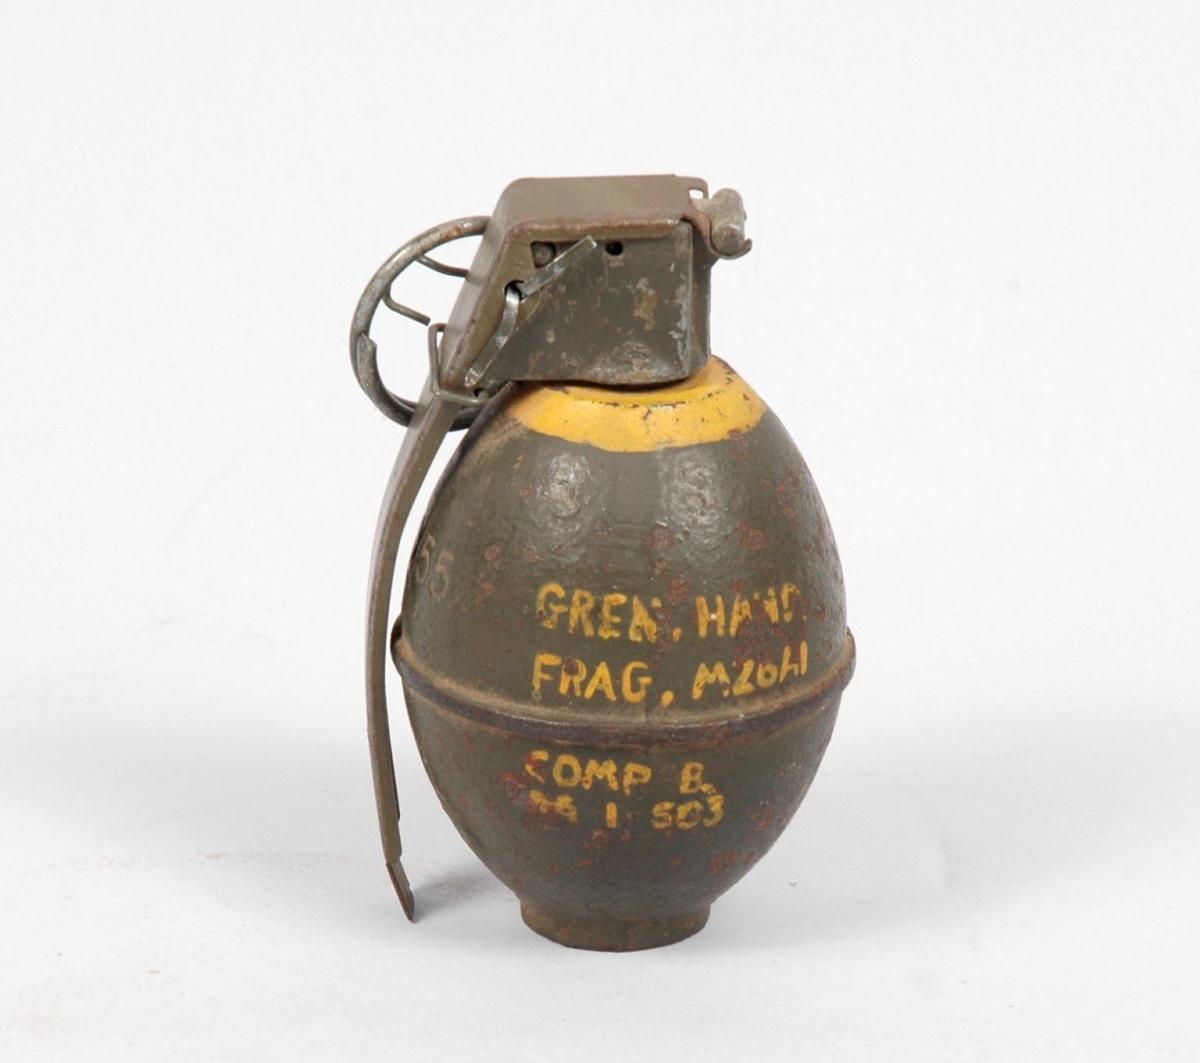 The M26, and its successor, the M26A1, shown here, were first used in Korea. Like the pineapple, these grenades were also extensively used by U.S. troops from the early stages of the Vietnam war.